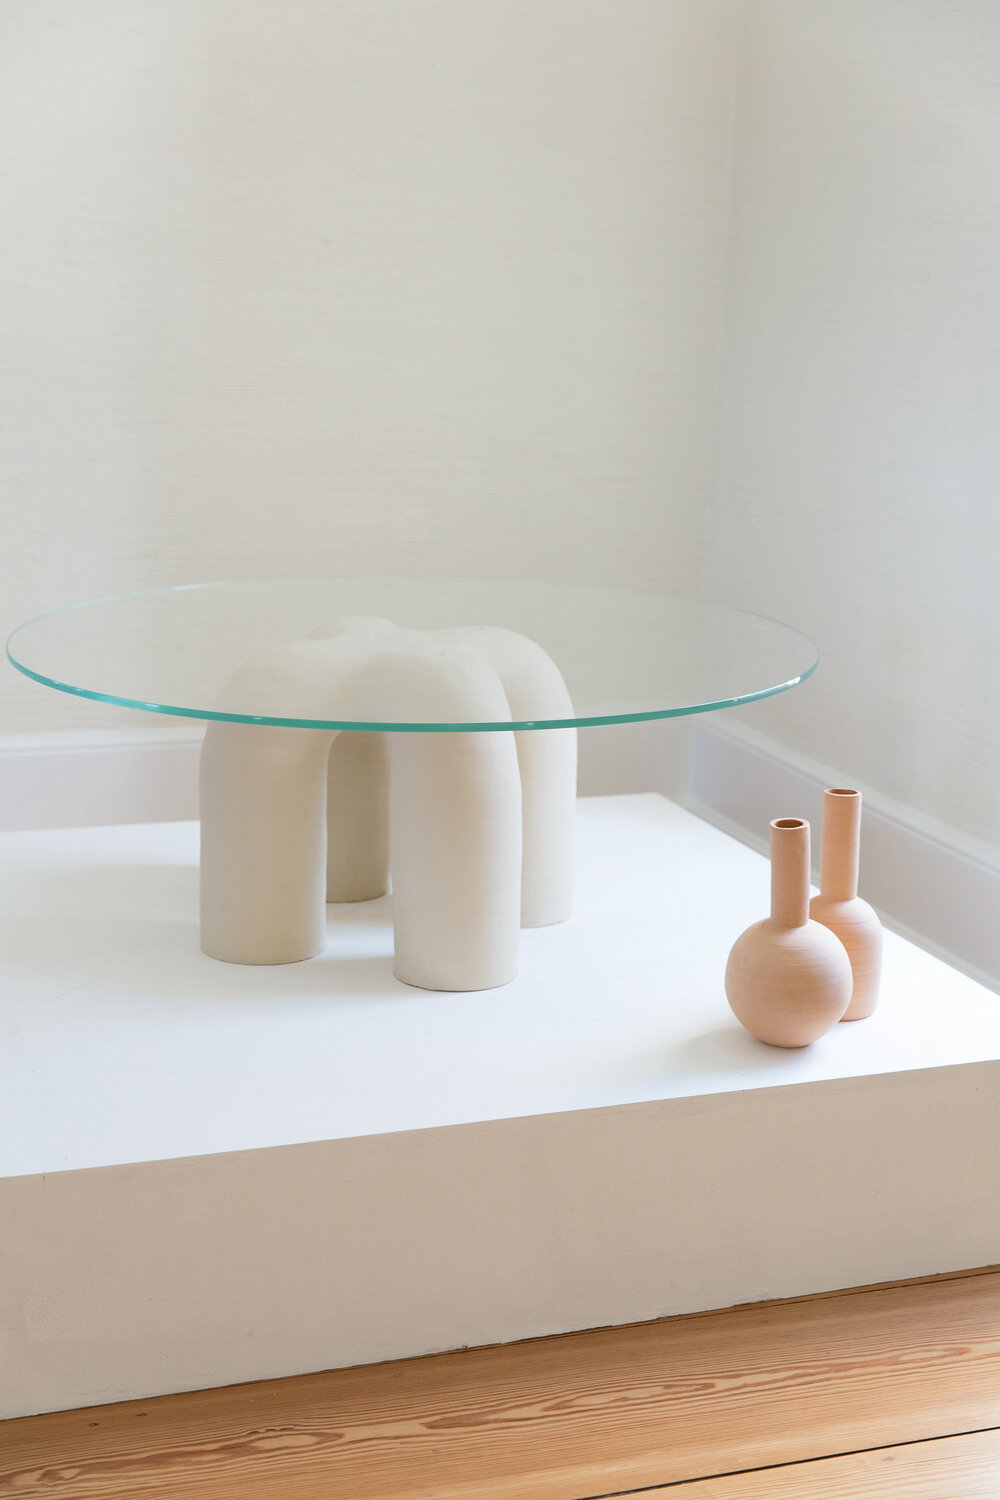 Ceramic Stitch Table — ENY LEE PARKER